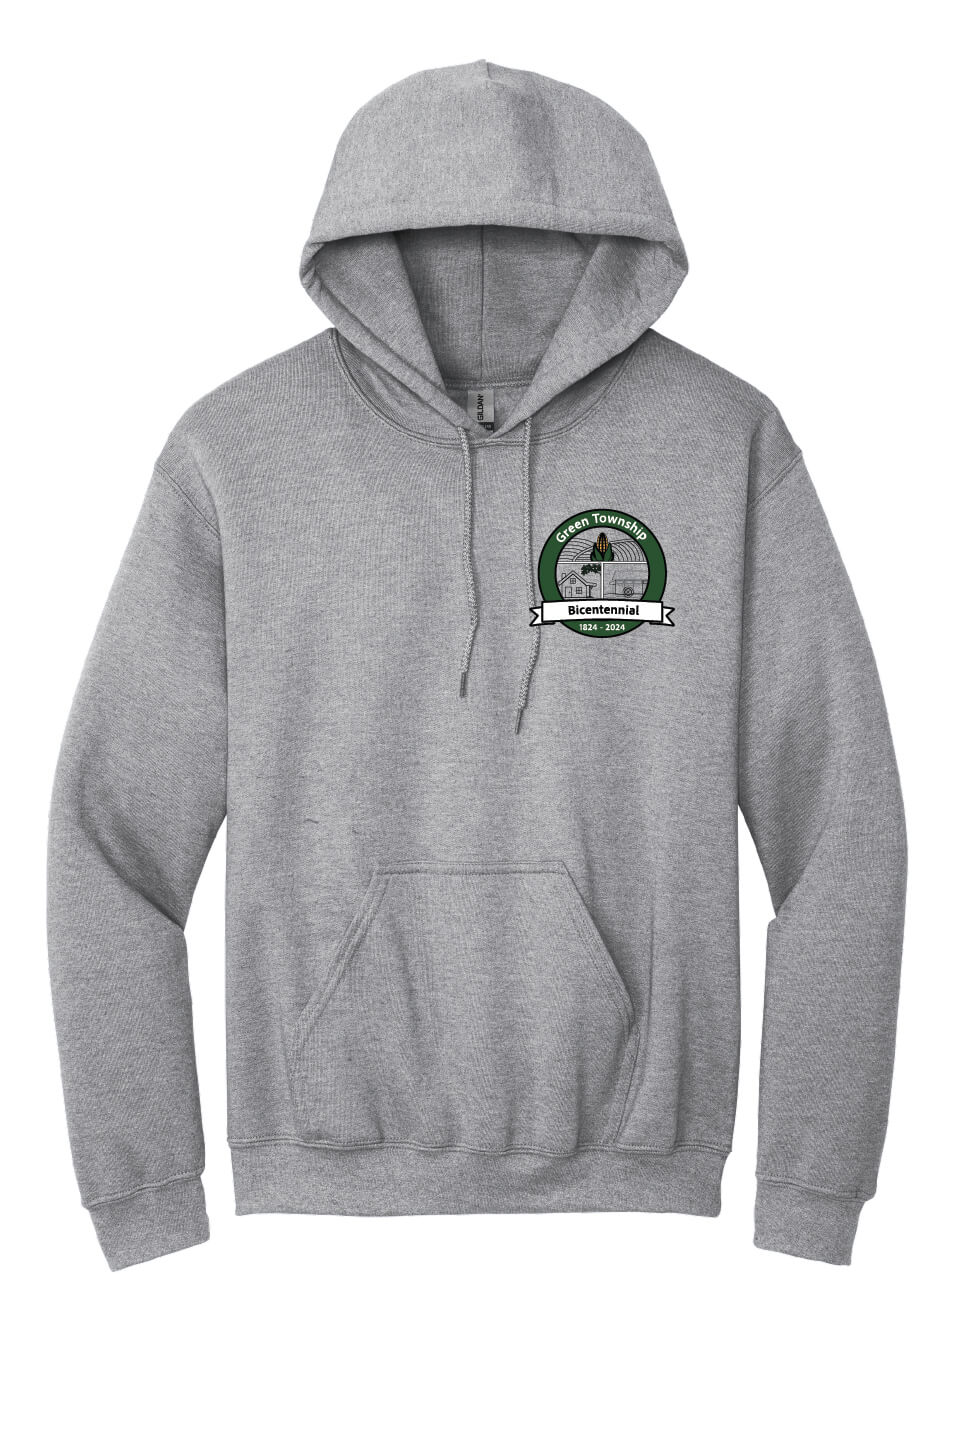 Hoodie  (Youth) gray